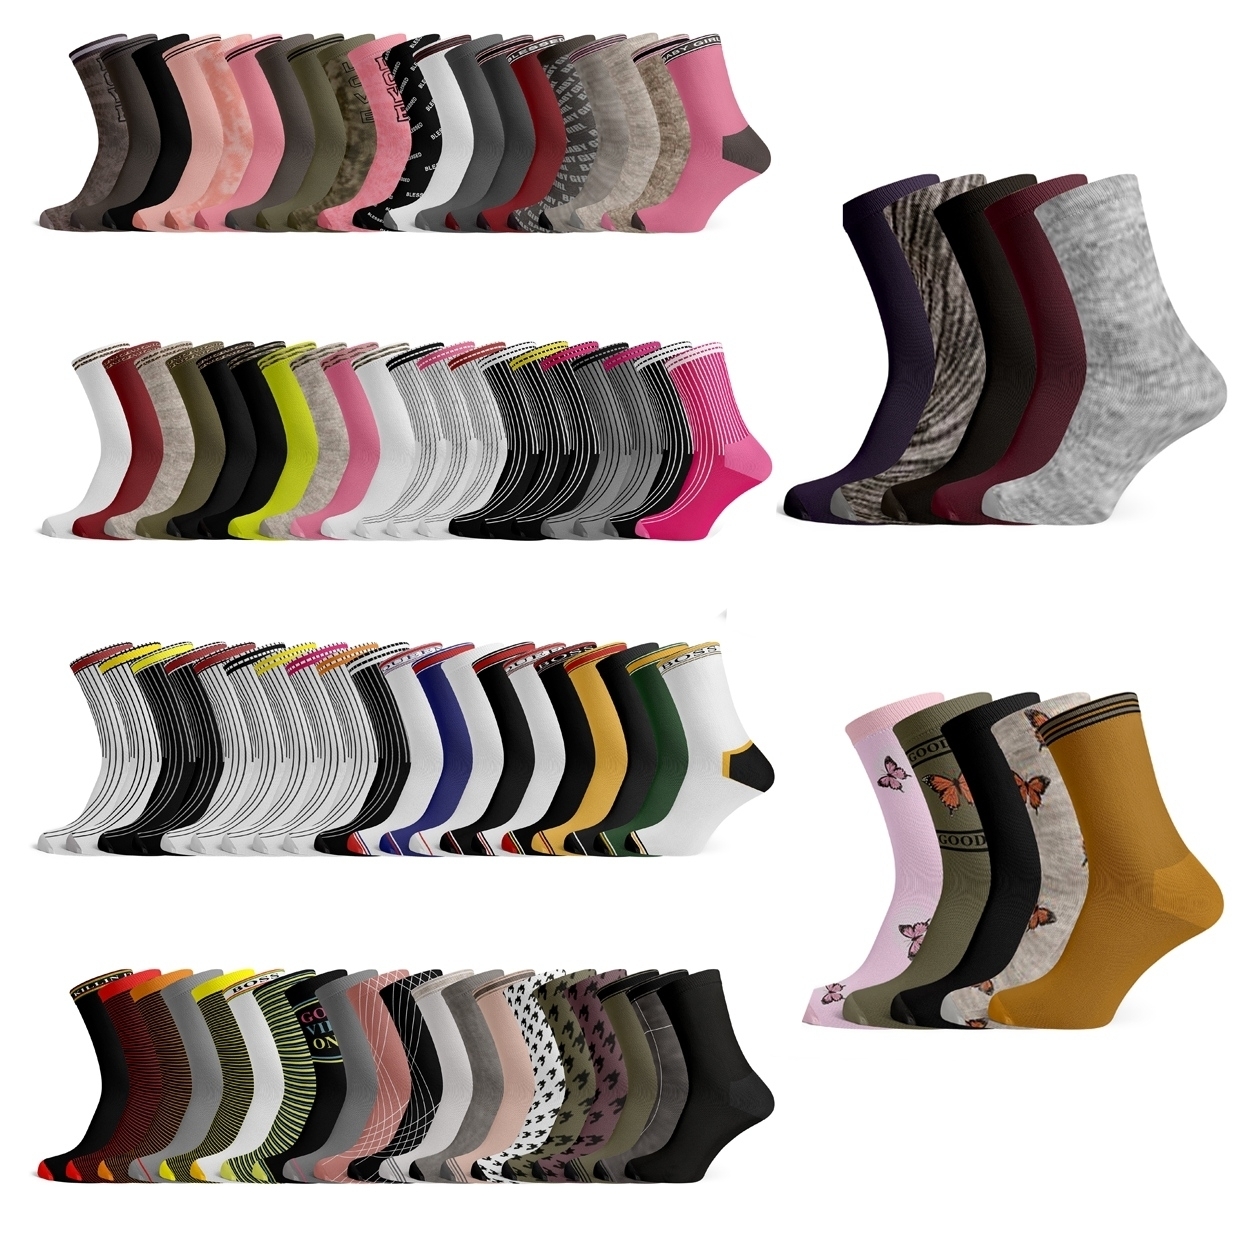 10-Pairs: Women’s Breathable Fun + Funky Colorful Crew Socks